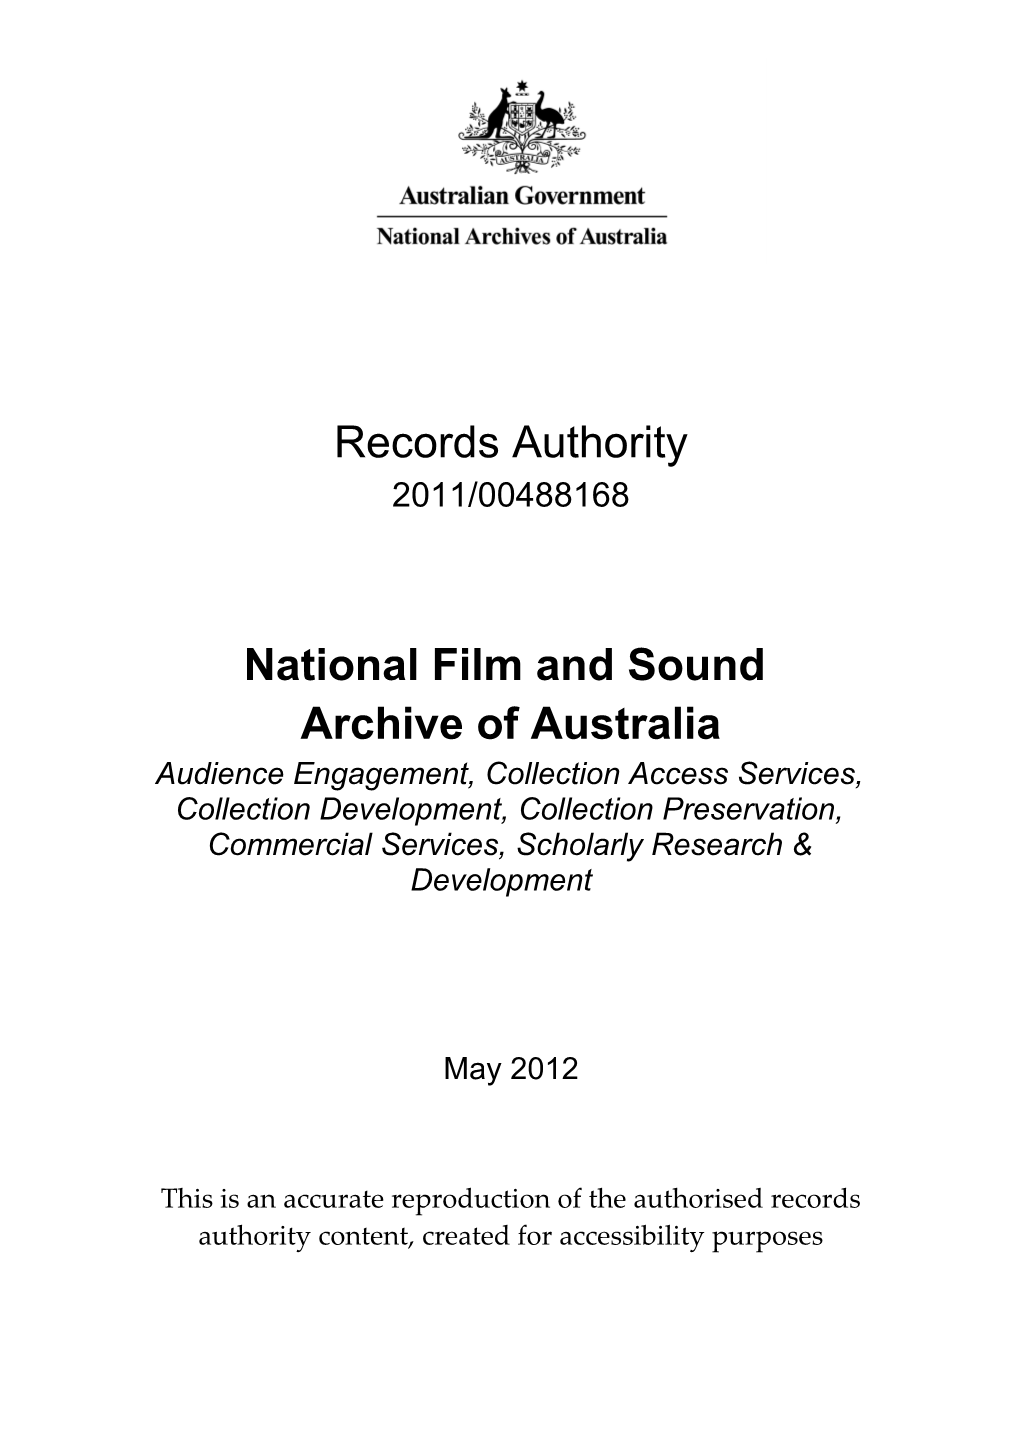 National Film and Sound Archive of Australia 2011/00488168